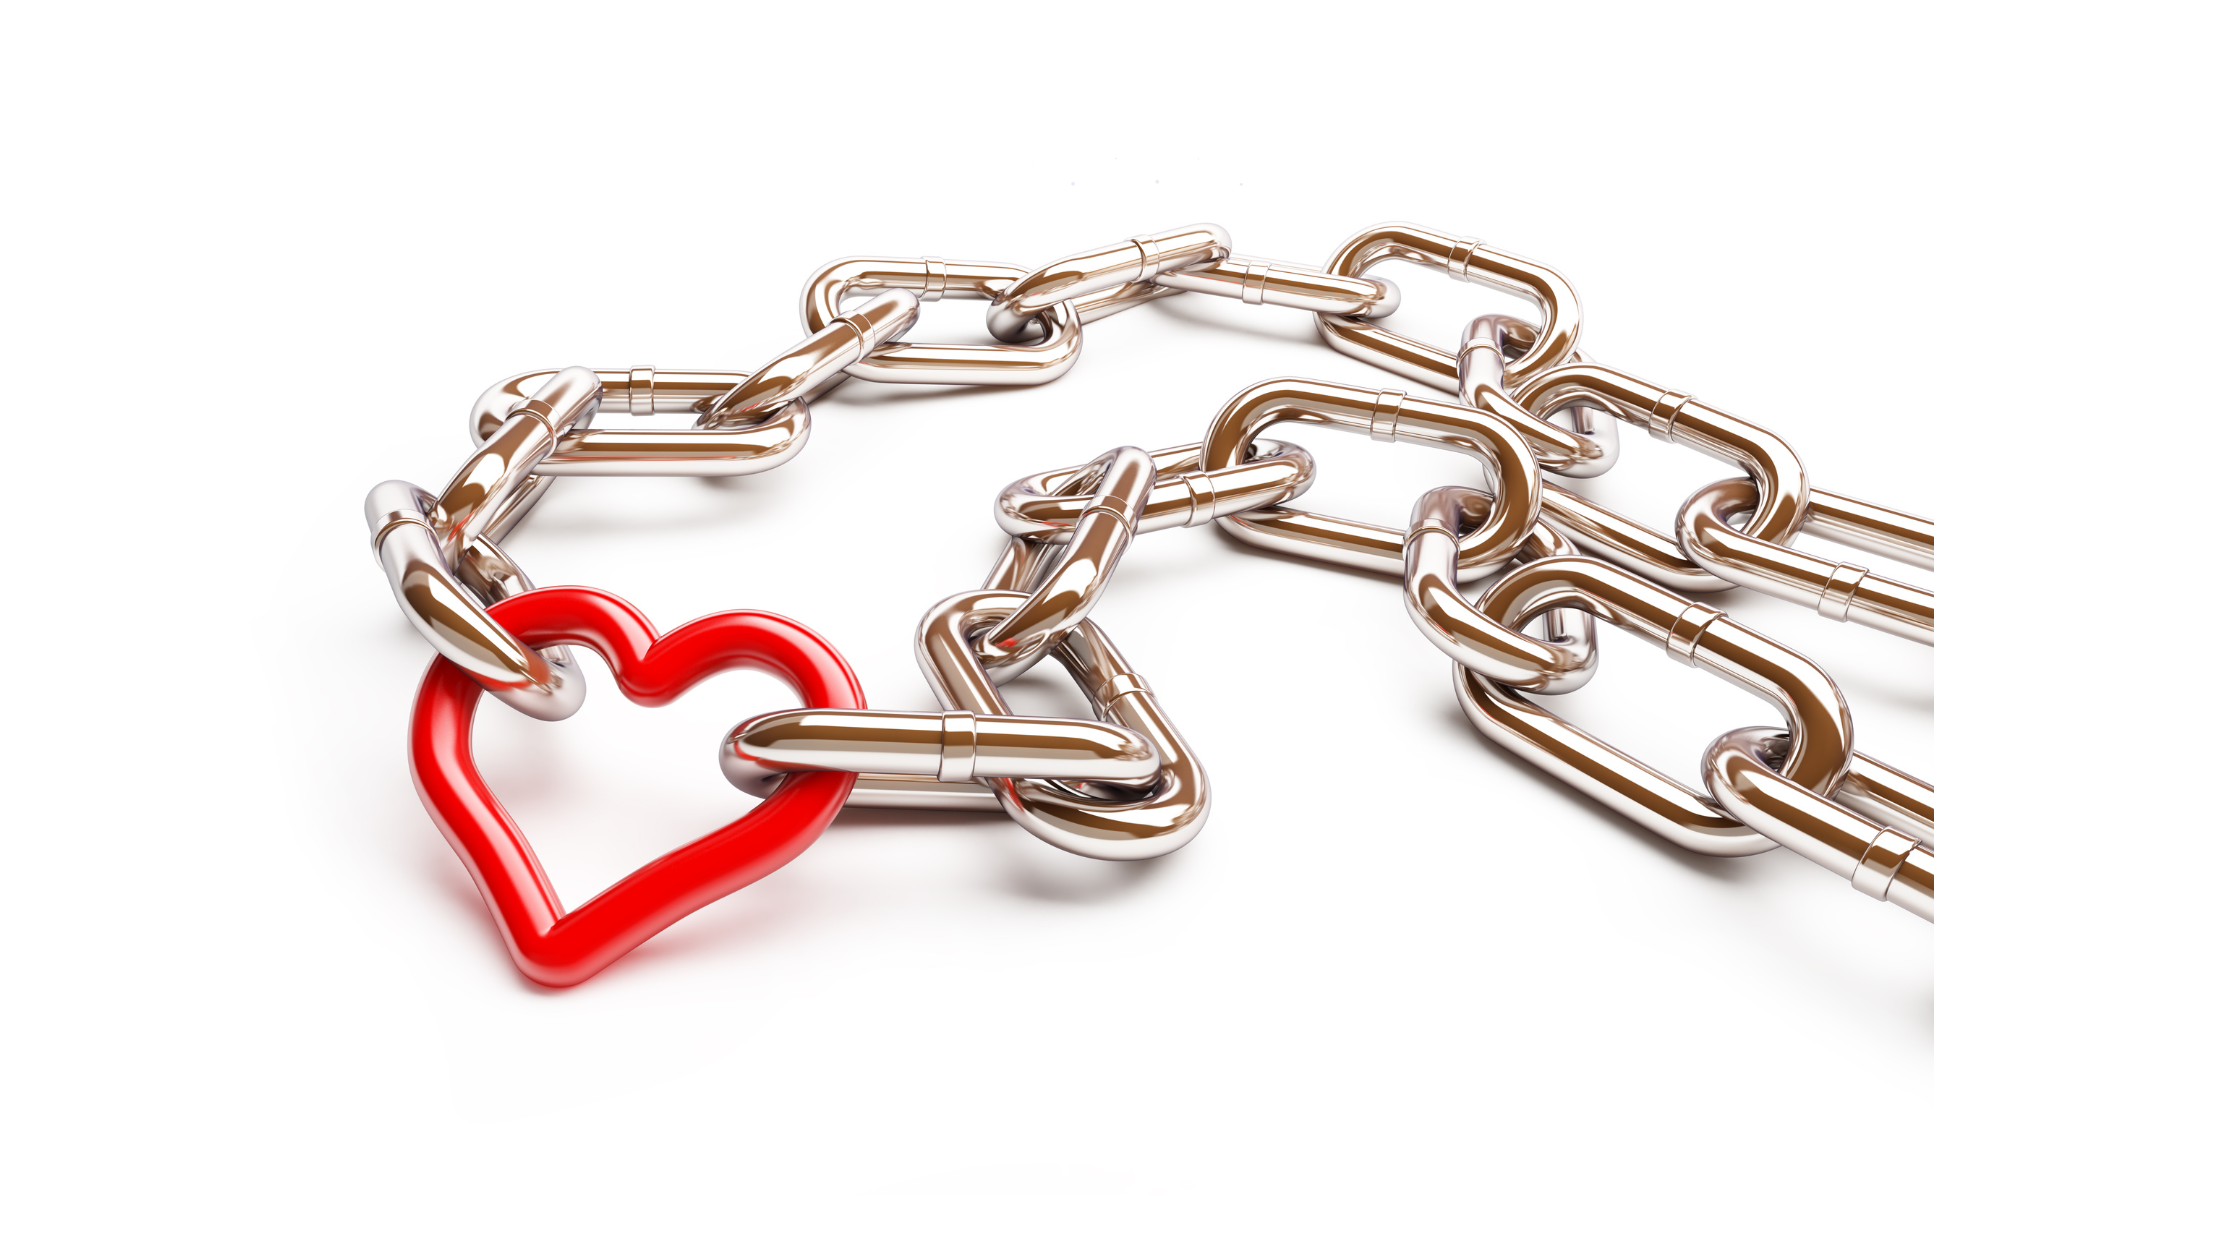 A Chain of love